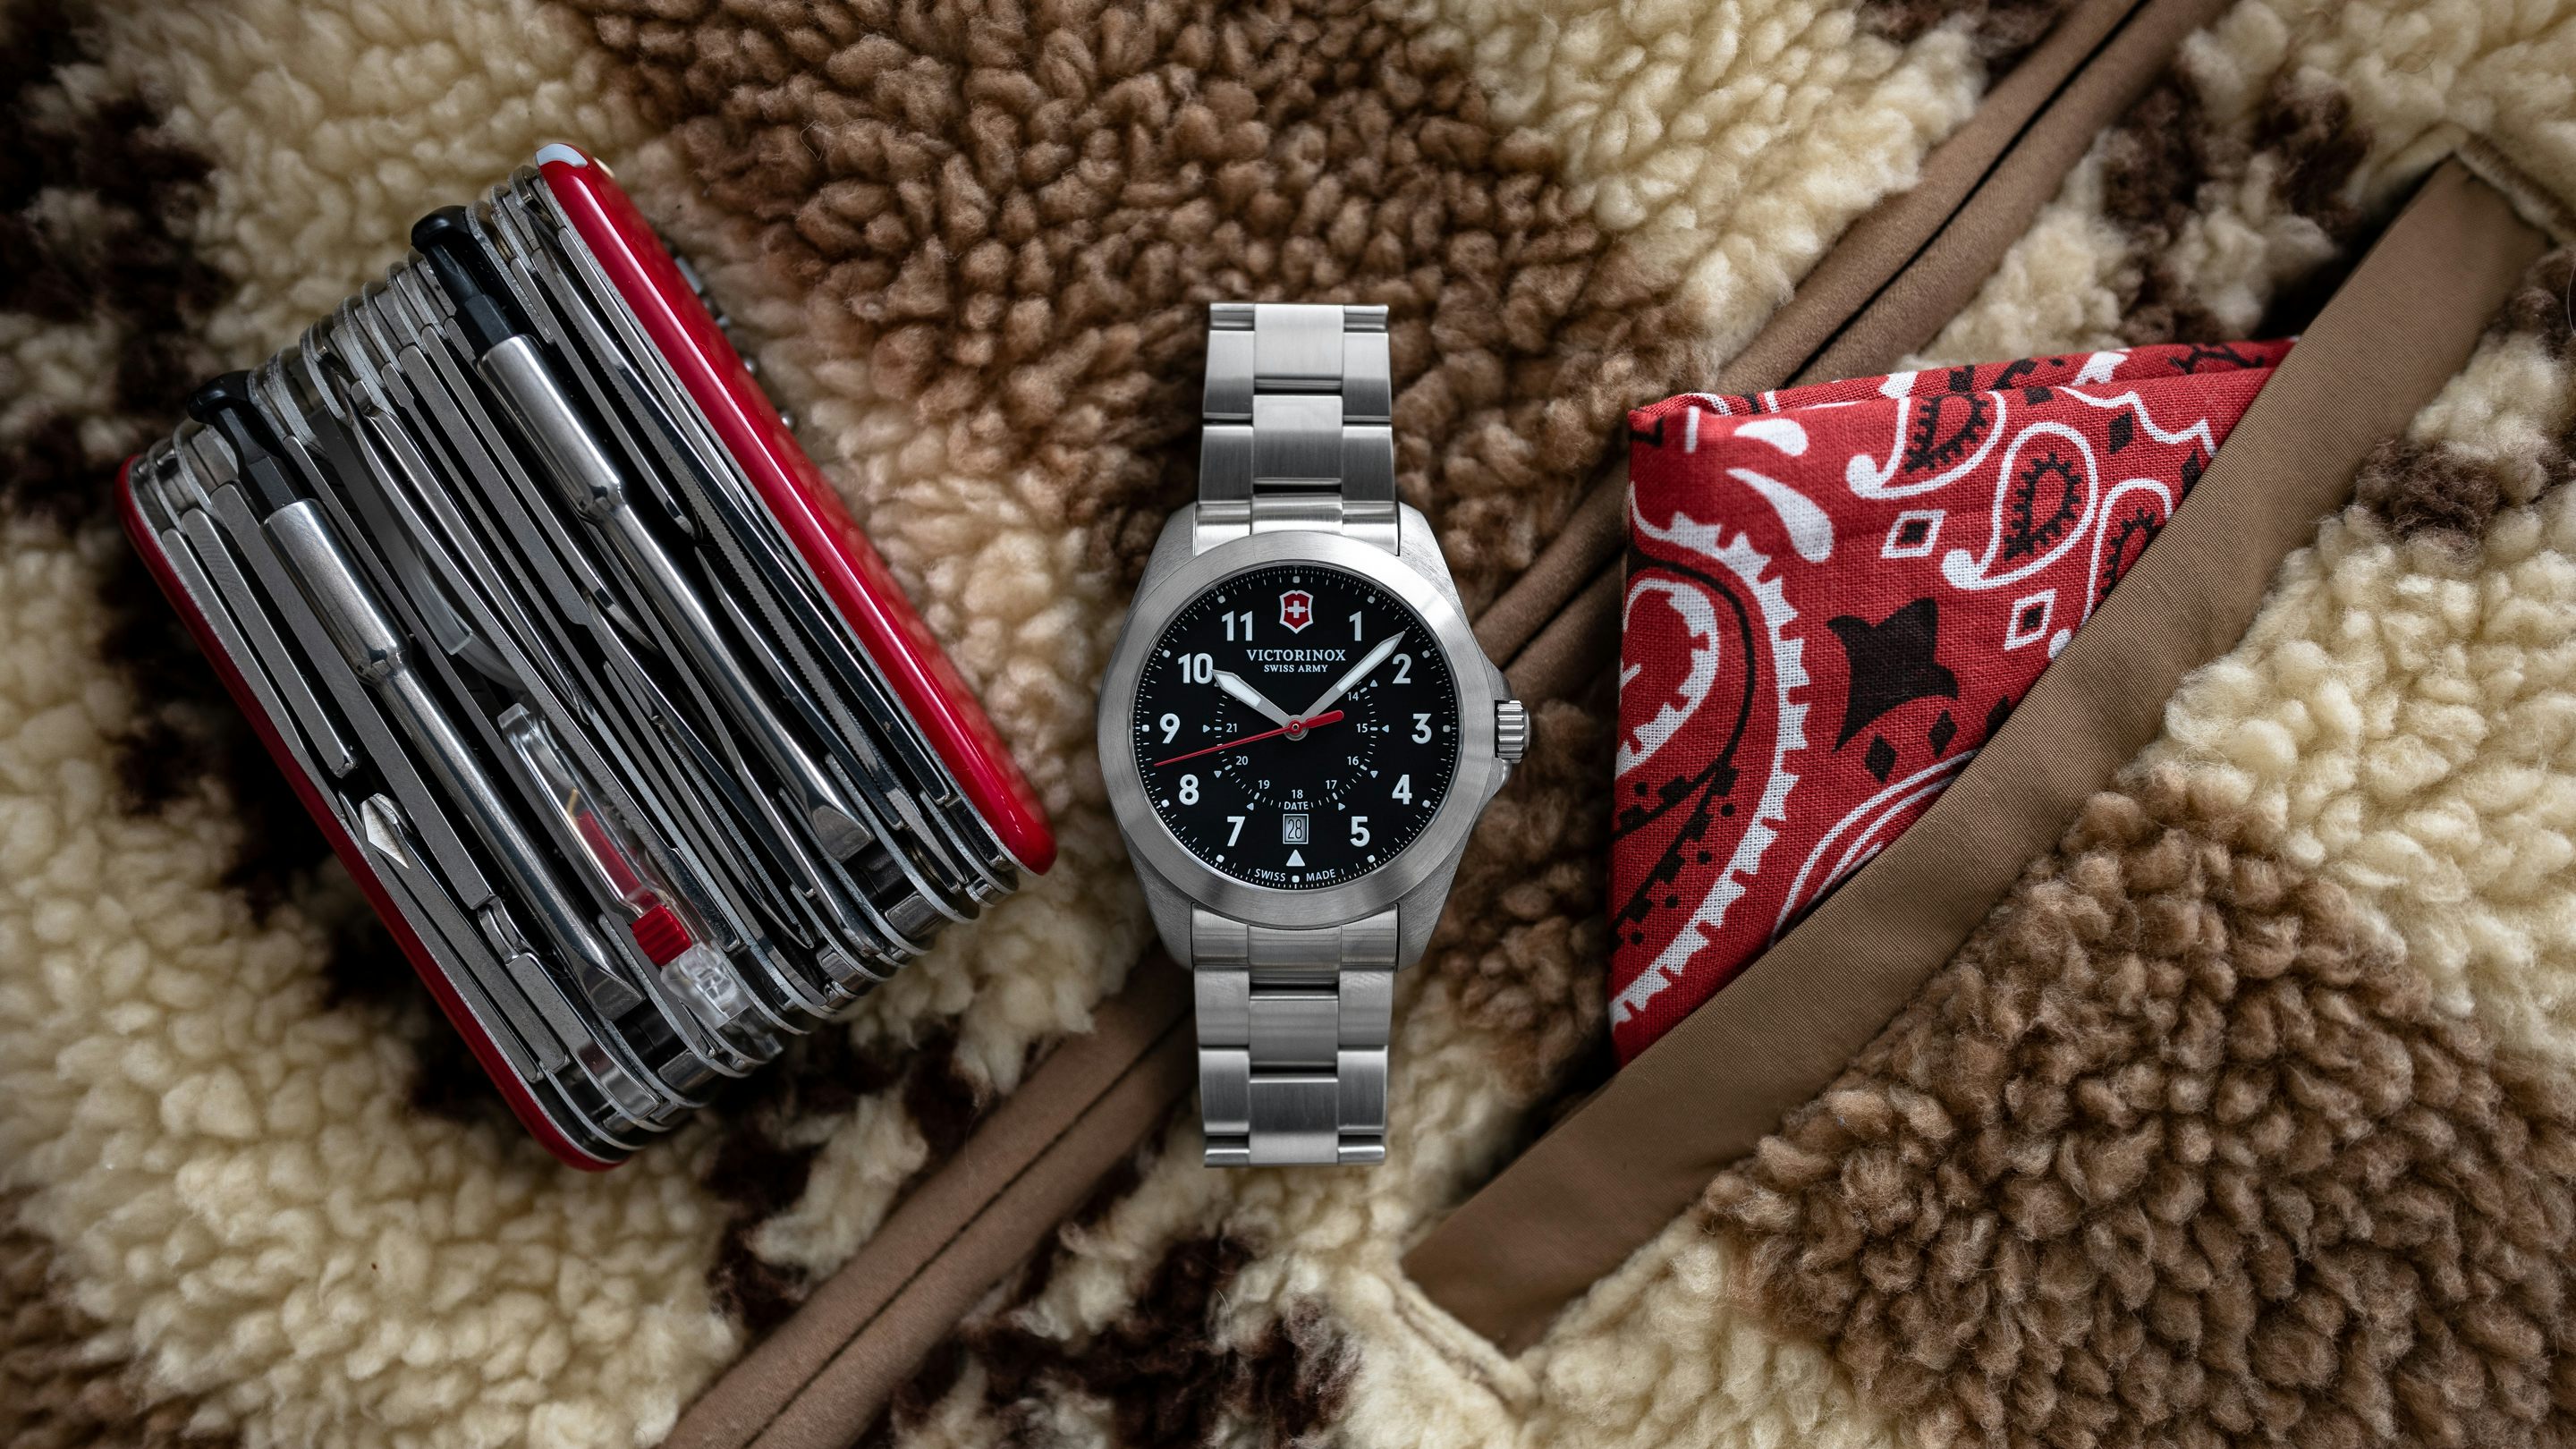 Swiss Alpine Military watches: Shop with discount!